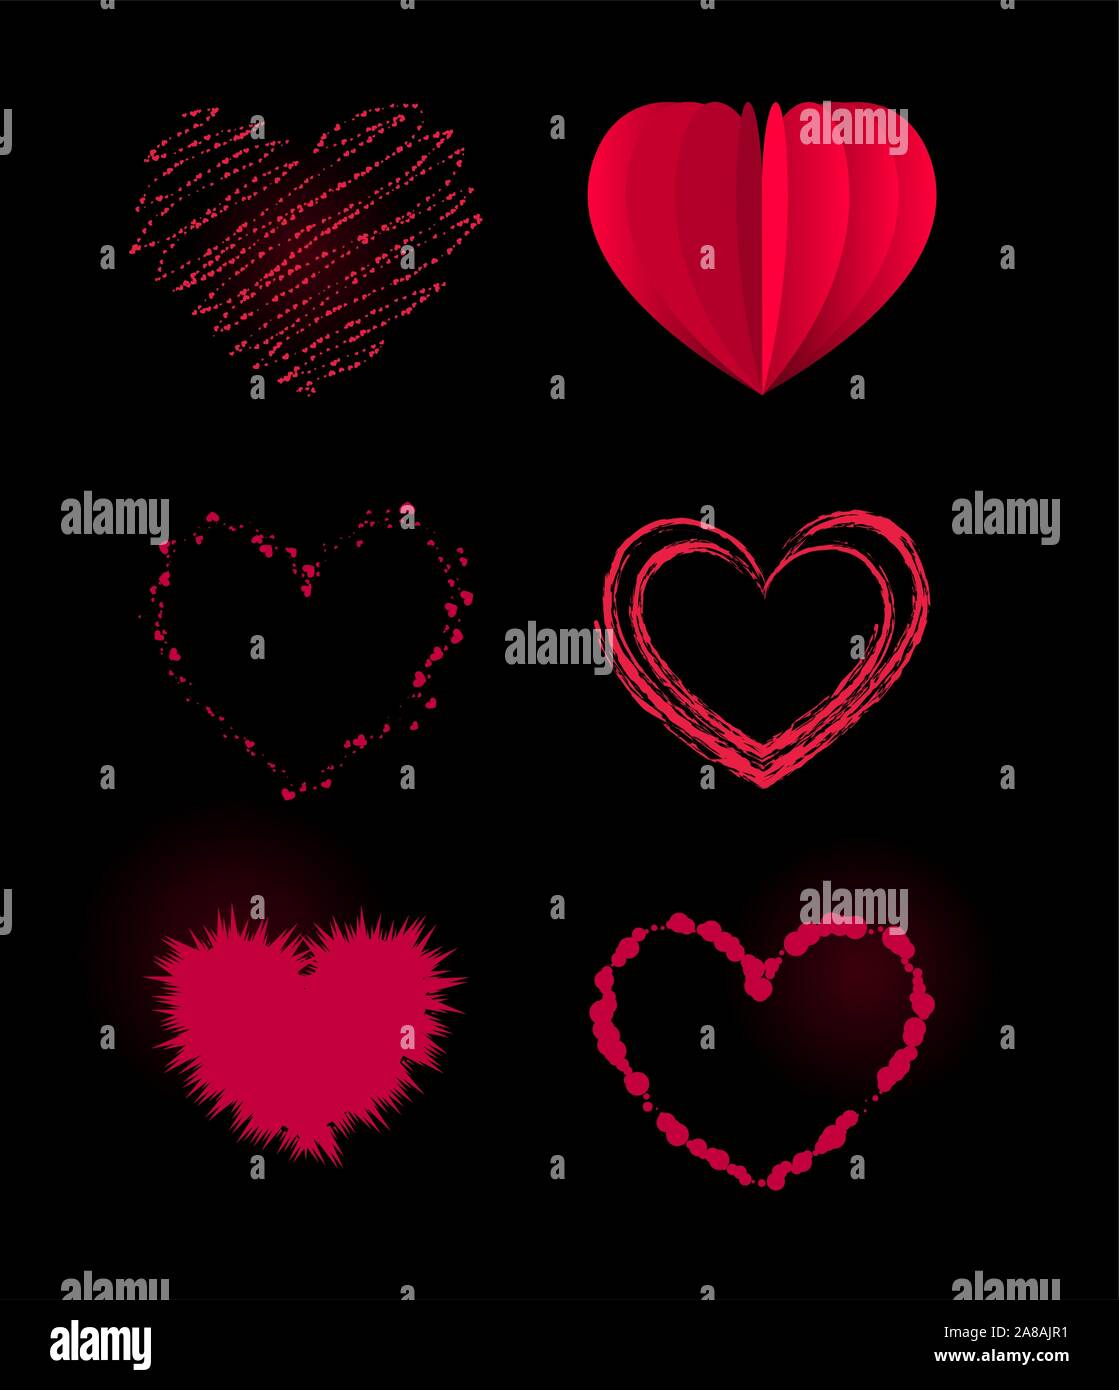 Heart icons shapes in different styles Stock Vector